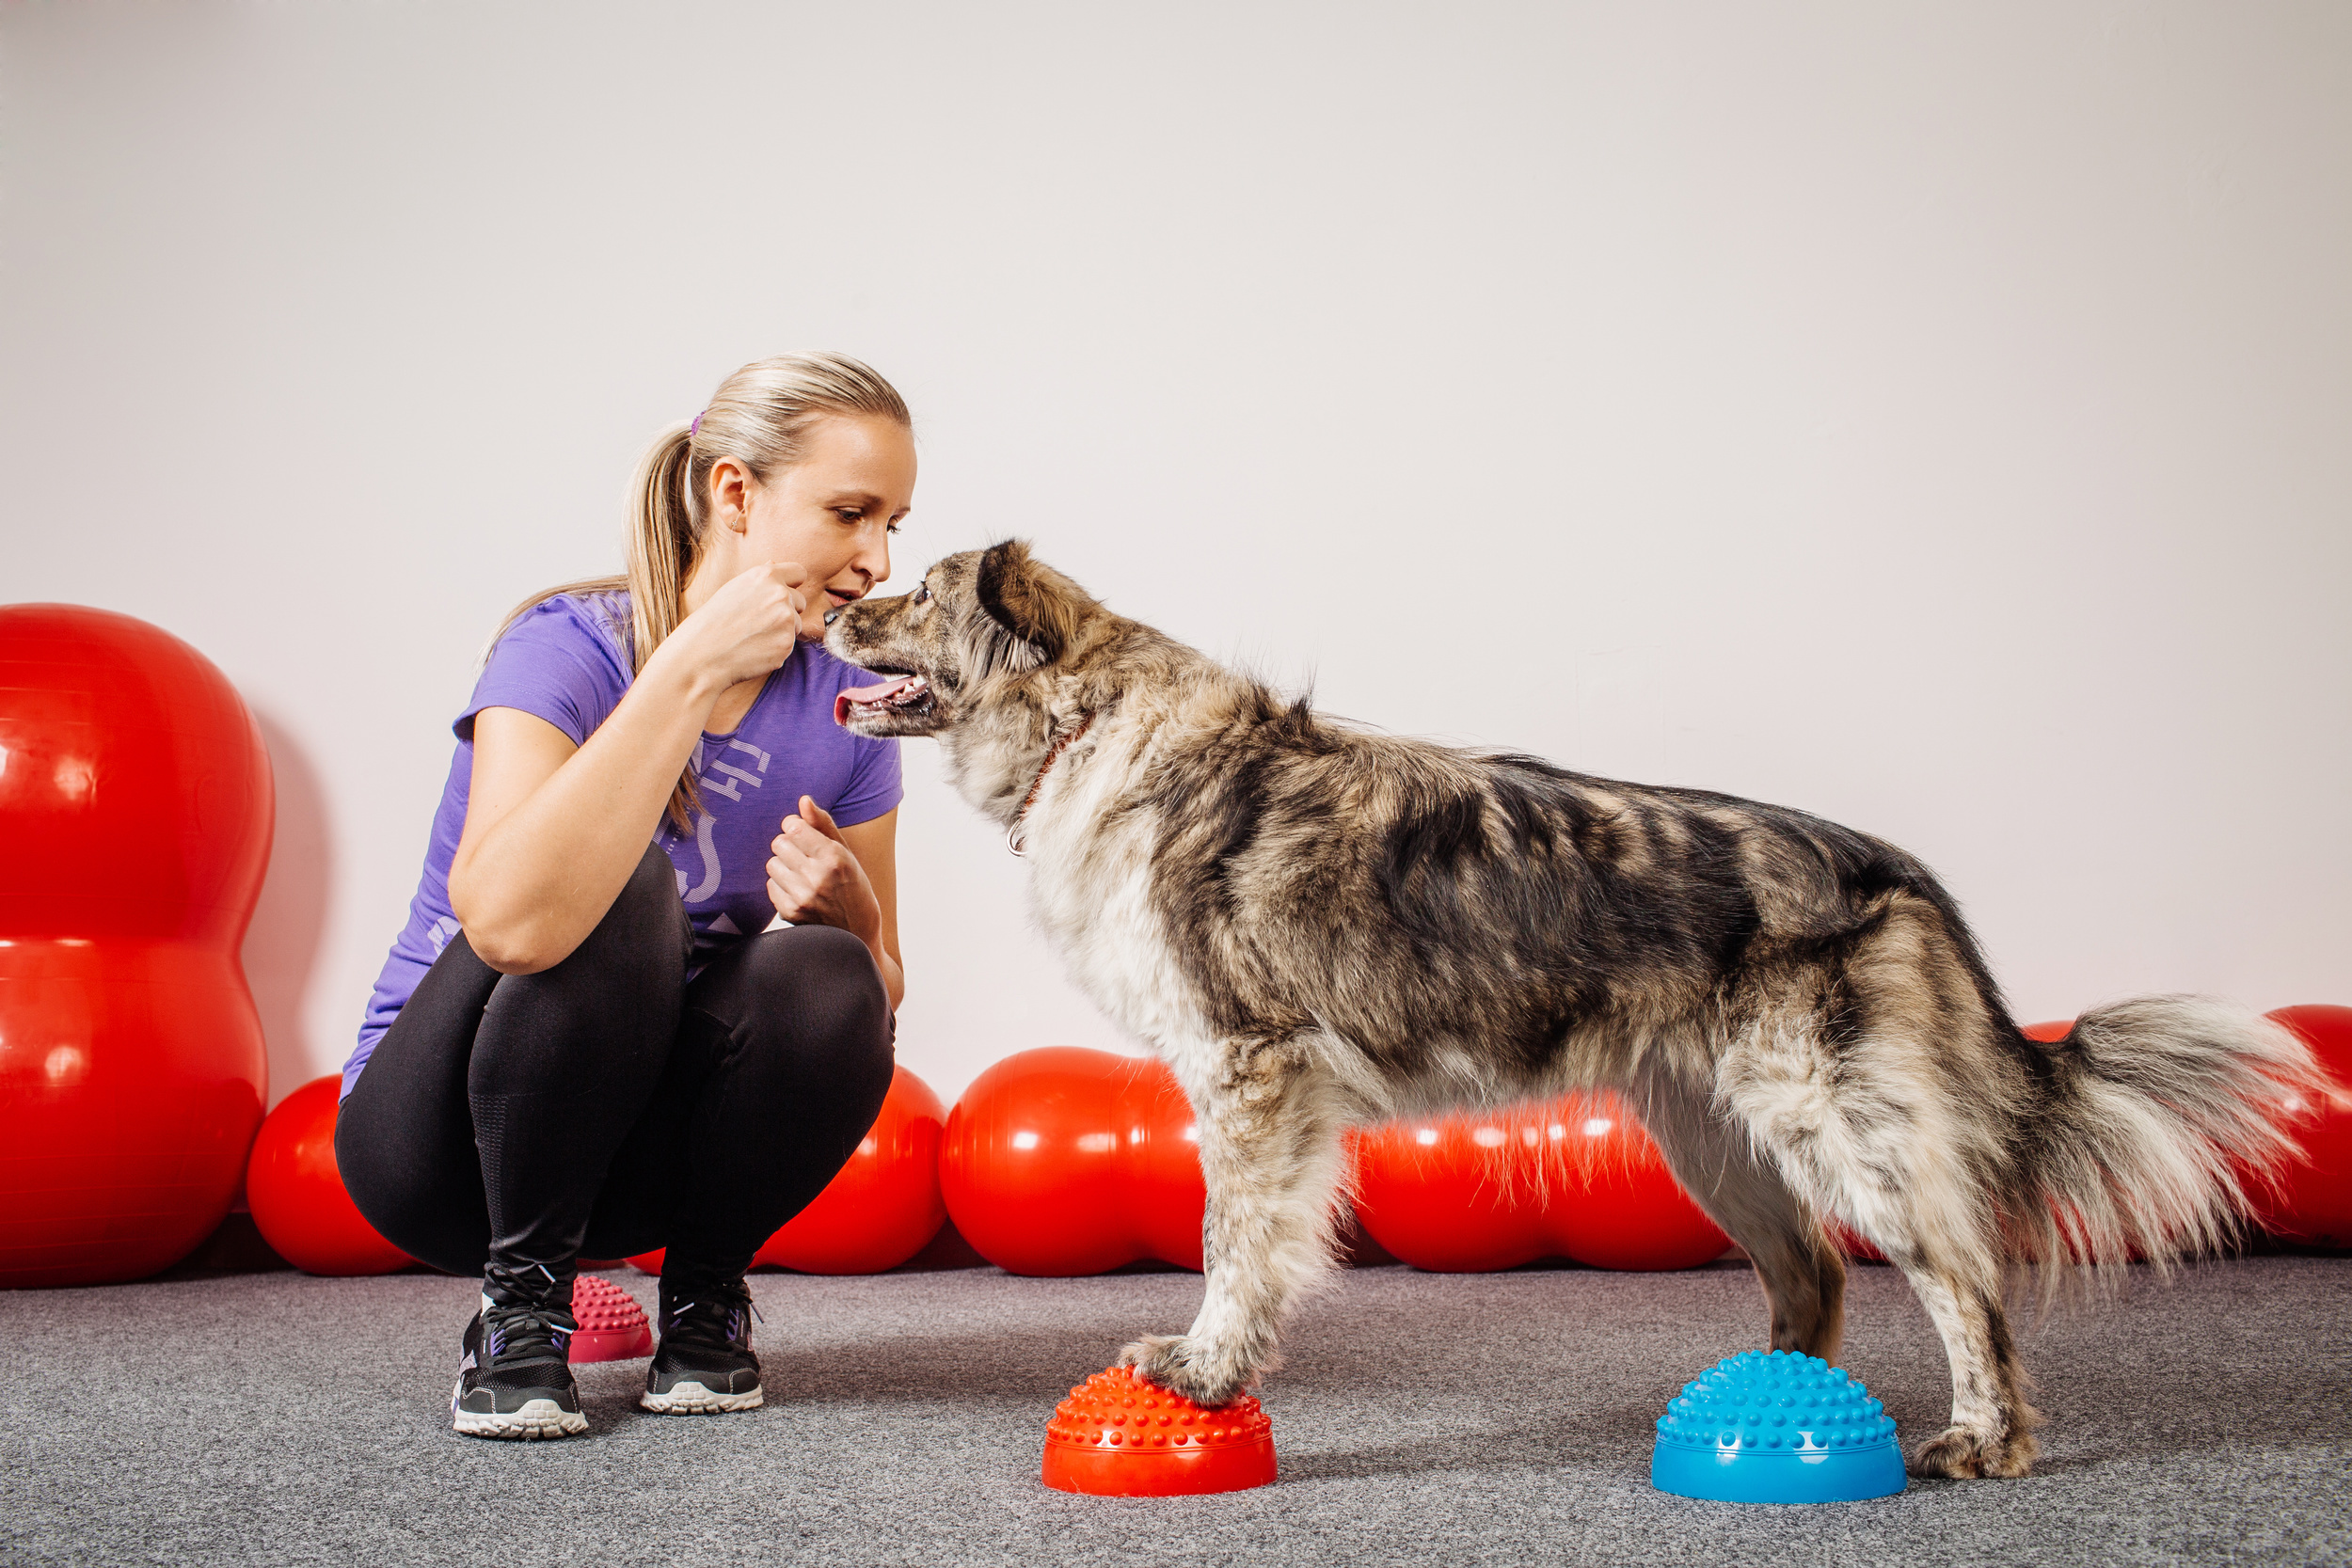 <p>If you work long hours or don't have tons of time to dedicate to training your new pet, consider hiring a trainer. They're experienced in dealing with common issues, like barking or scratching and can knock out problematic behaviors quickly and effectively. </p><p><a href='https://www.msn.com/en-us/community/channel/vid-cj9pqbr0vn9in2b6ddcd8sfgpfq6x6utp44fssrv6mc2gtybw0us'>Follow us on MSN to see more of our exclusive lifestyle content.</a></p>